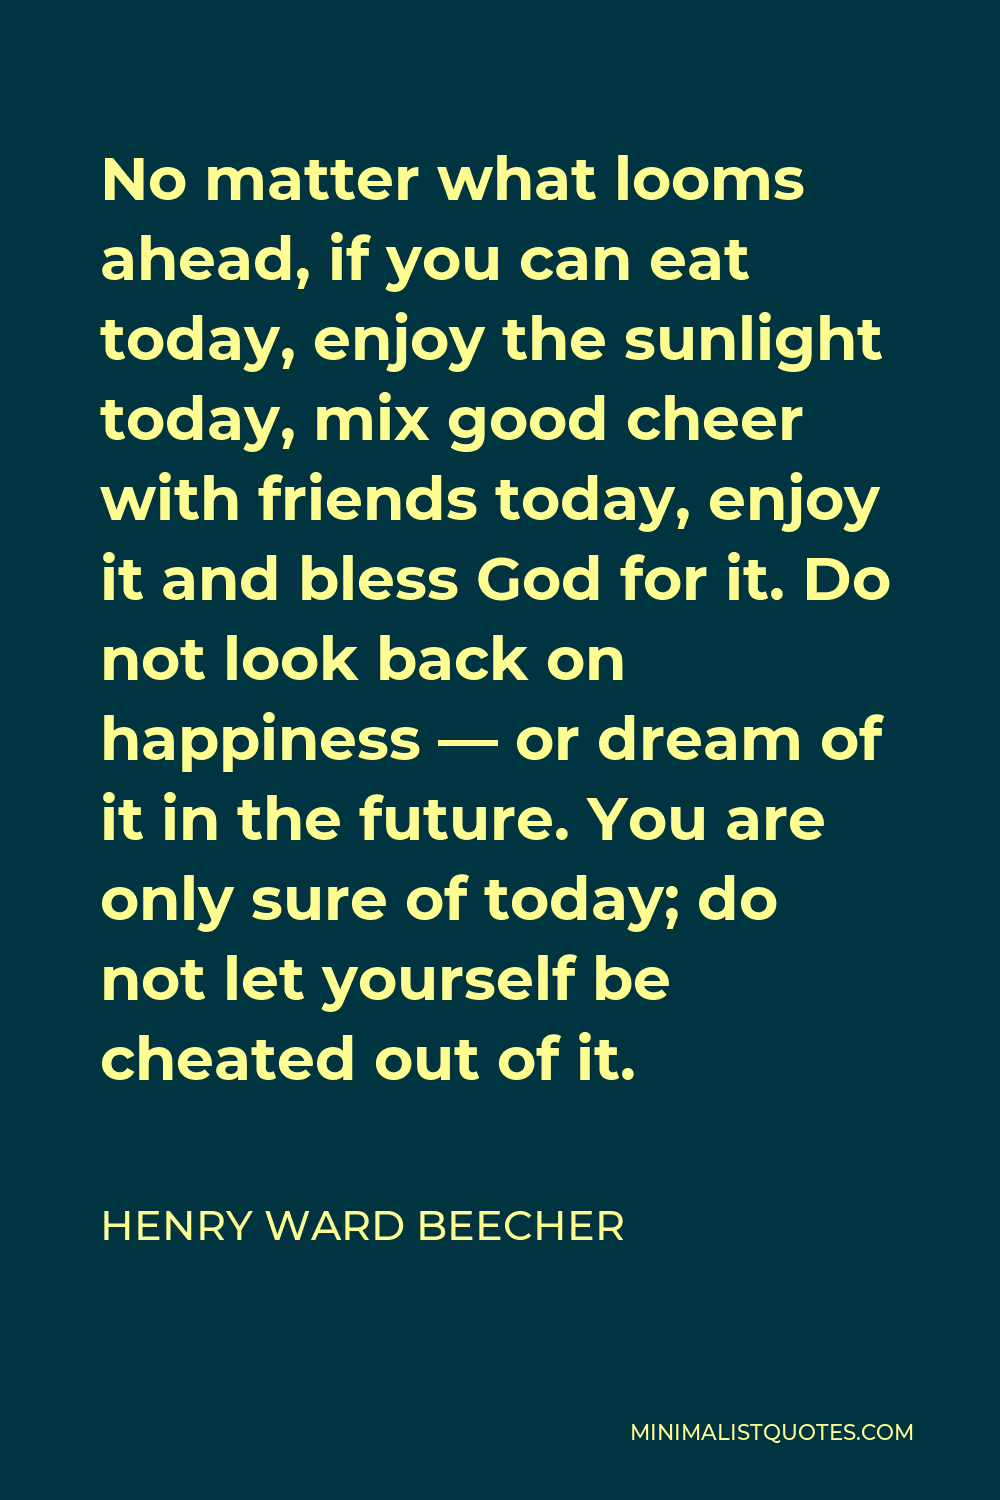 Henry Ward Beecher Quote - No matter what looms ahead, if you can eat today, enjoy today, mix good cheer with friends today enjoy it and bless God for it.